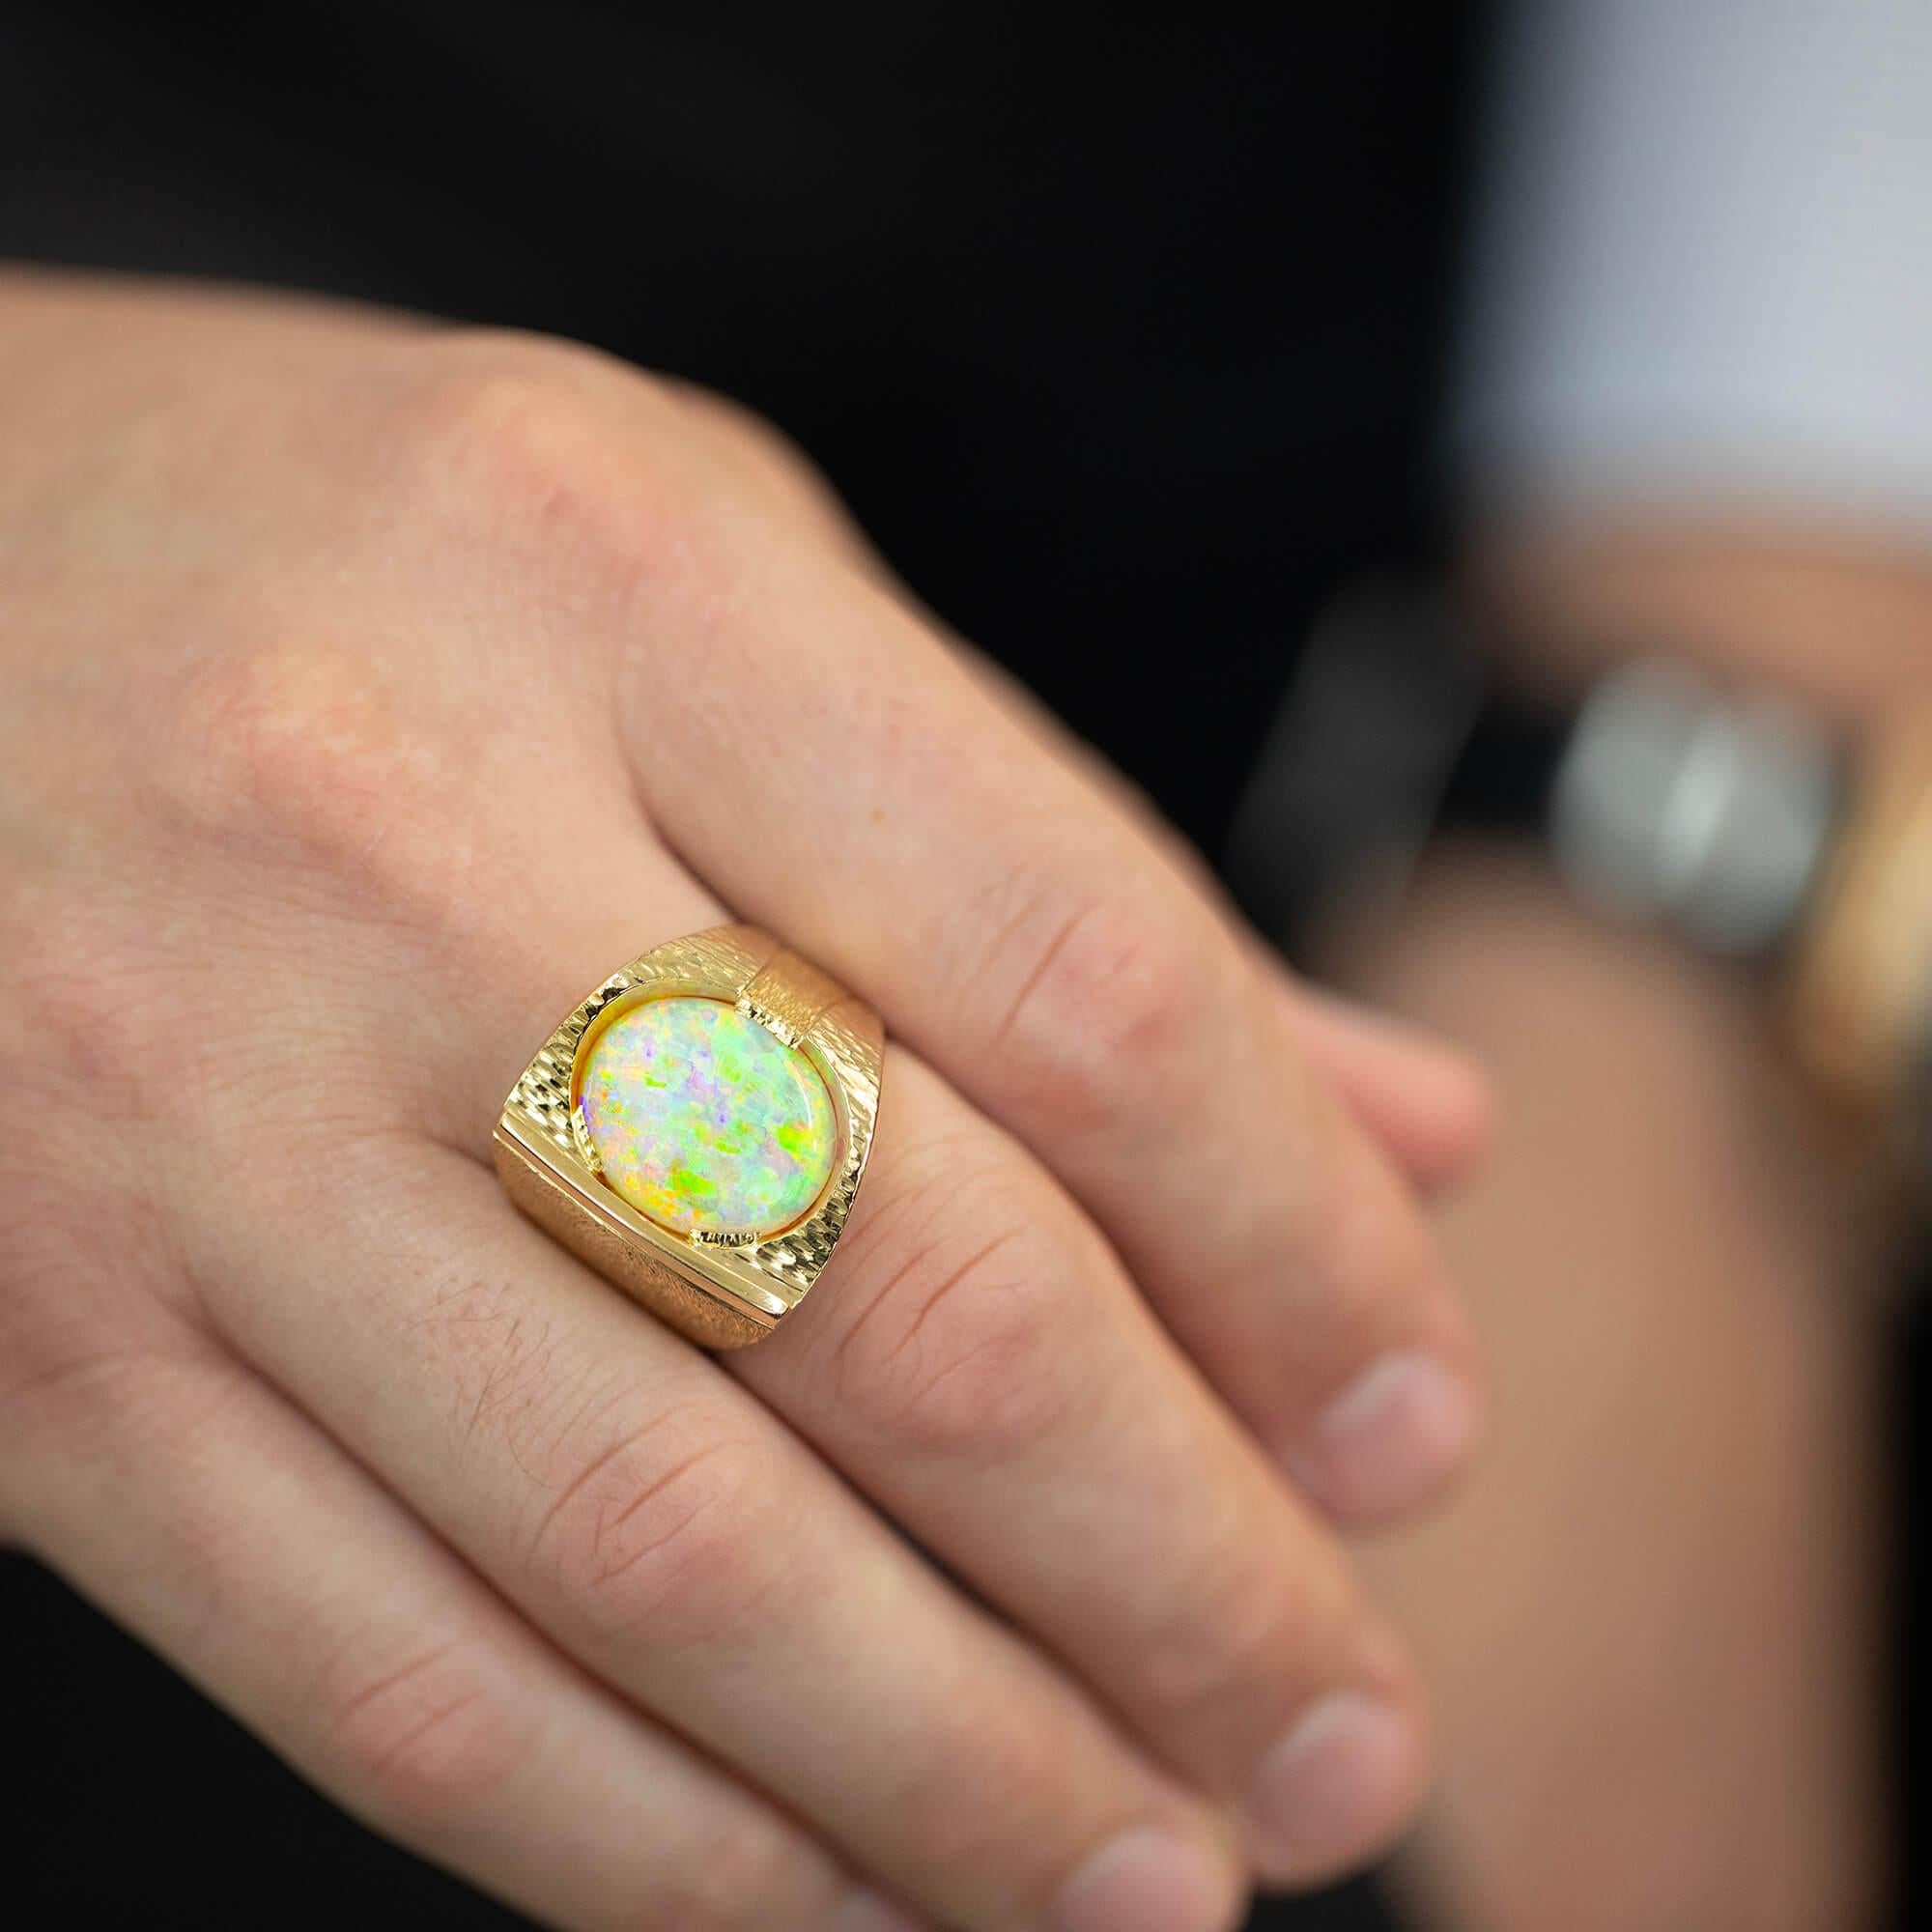 This 18k yellow gold ring grading from 5.79 to 23.5mm in width with an elaborately textured finish, set with a stunning light, low cabochon cut Coober Pedy Opal. Hallmarked and stamped with marker mark by renowned jeweller, Manfred Lorenz.

Opal –